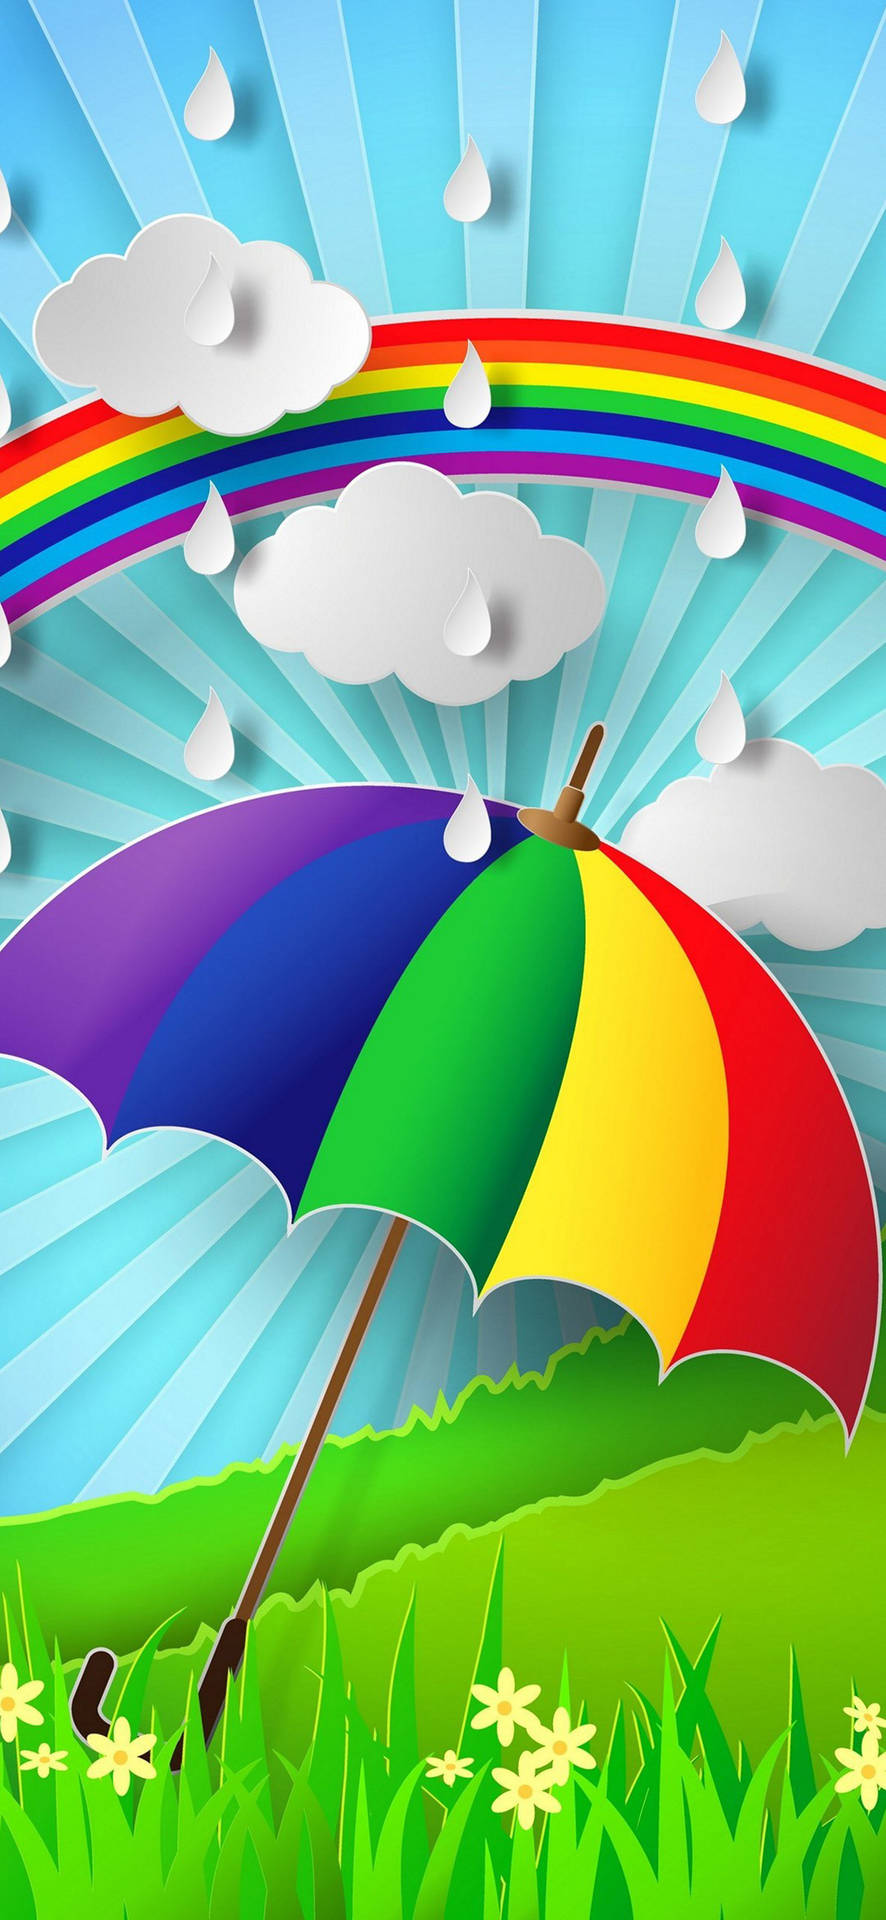 Download Samsung Galaxy S22 Rainy Weather Wallpaper | Wallpapers.com